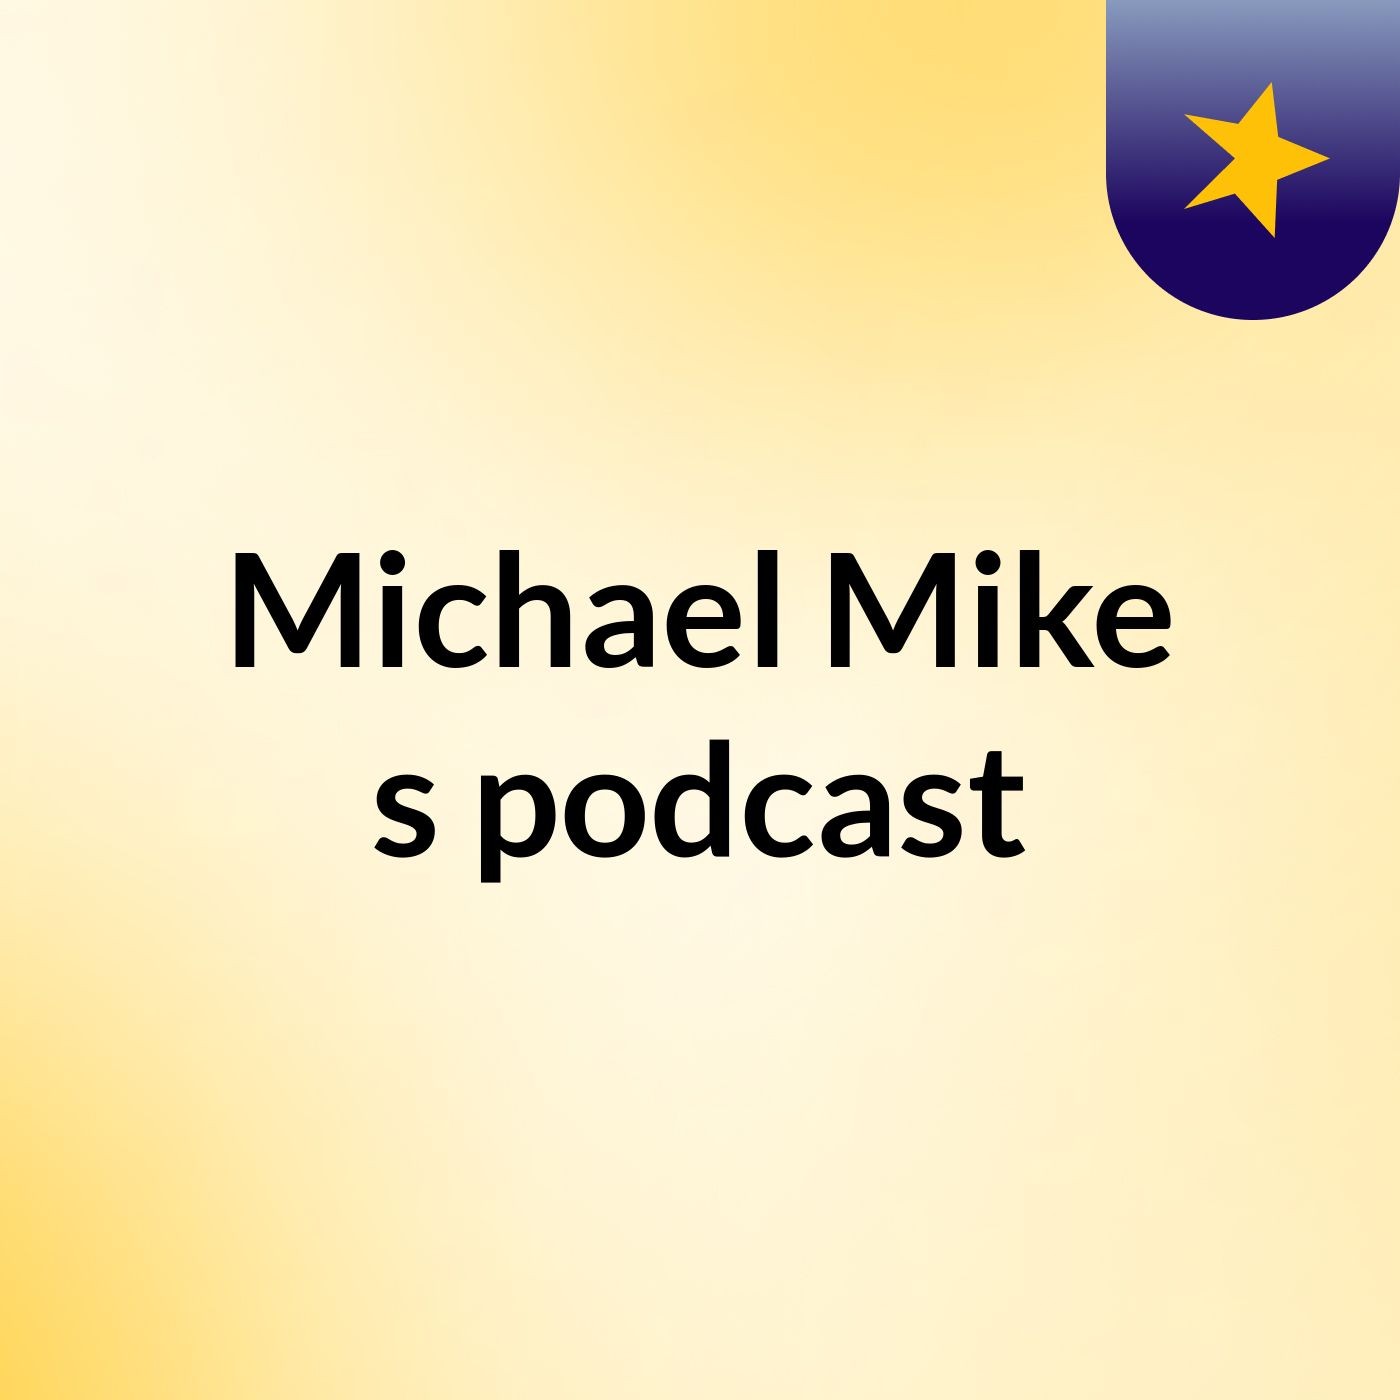 Michael Mike's podcast